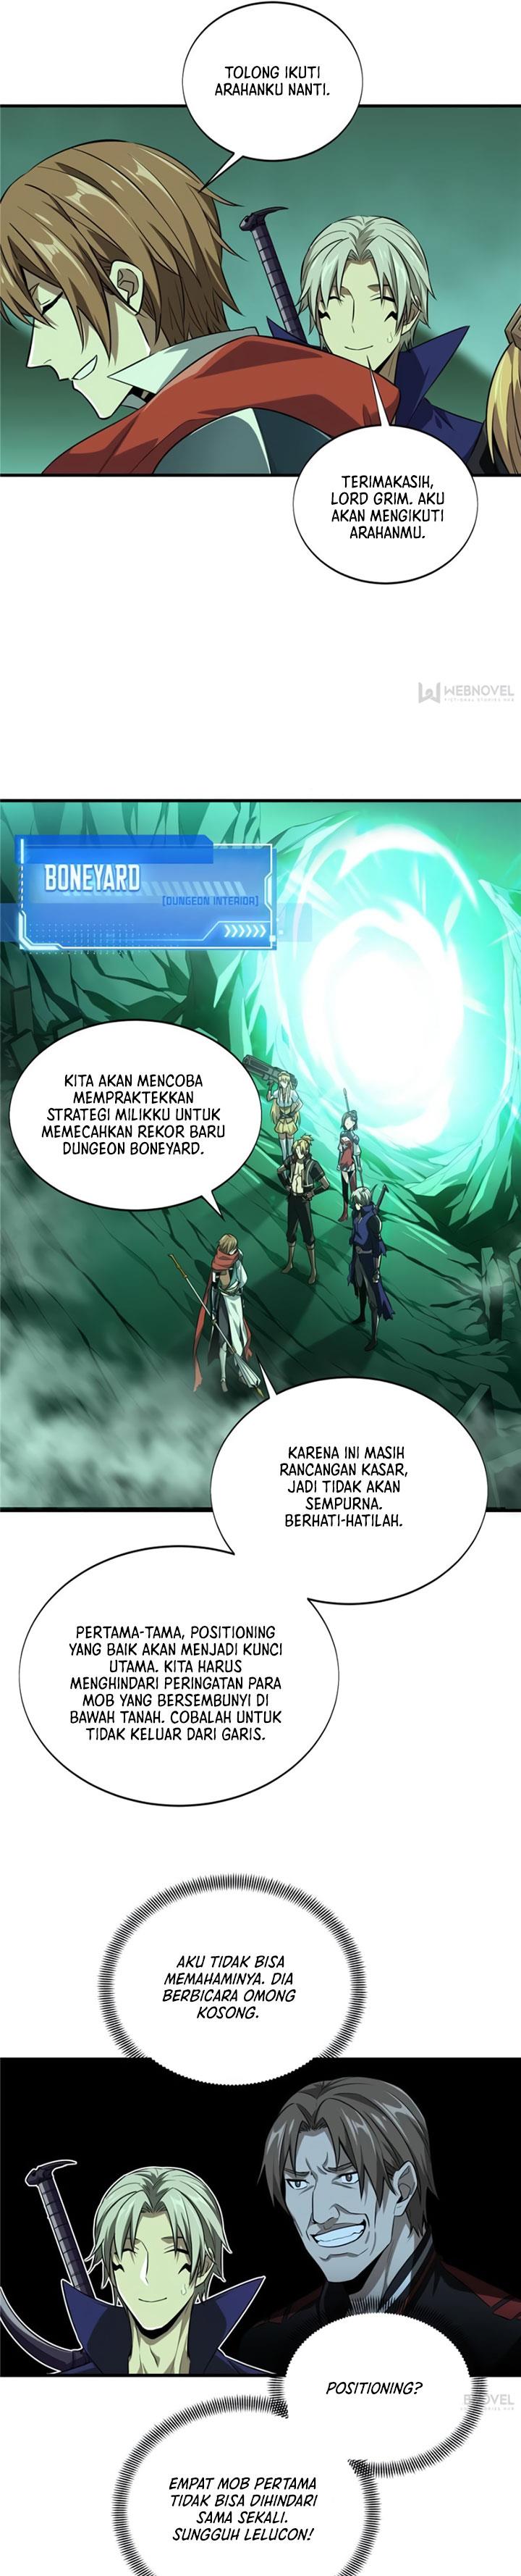 The King’s Avatar Chapter 51